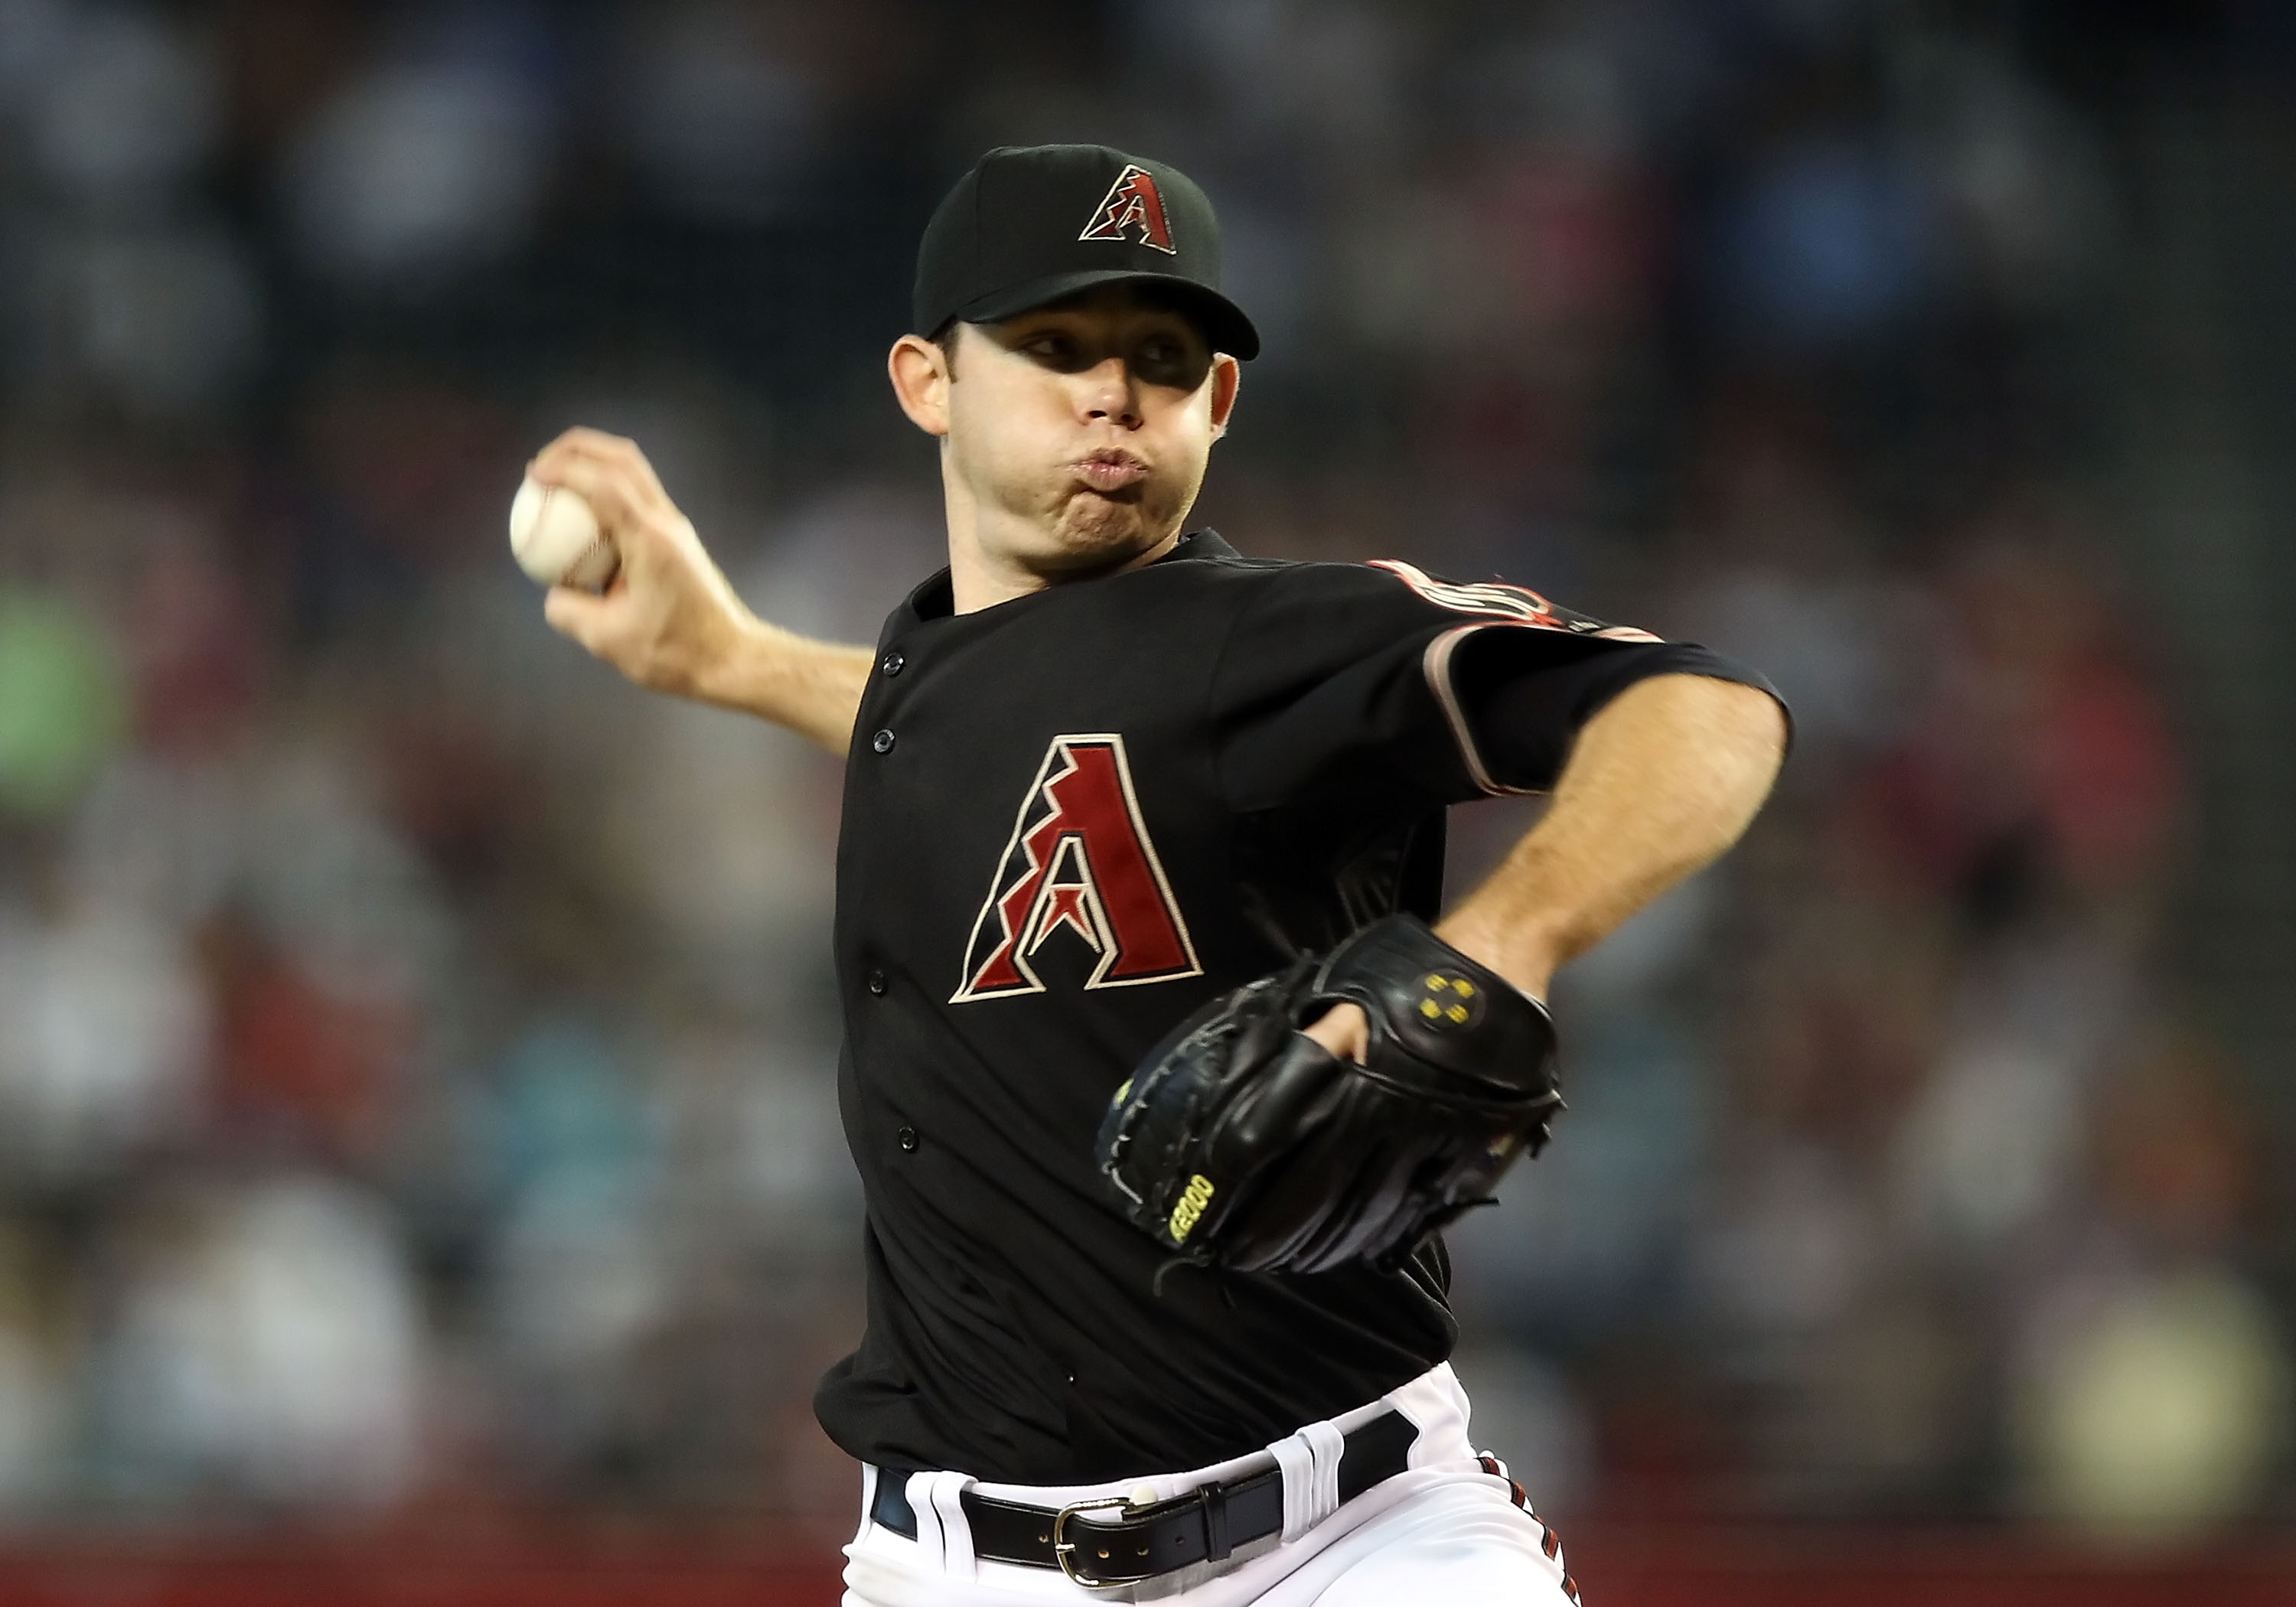 PHOENIX - JULY 10:  Starting pitcher Ian Kennedy #31 of the Arizona Diamondbacks pitches against the Florida Marlins during the Major League Baseball game at Chase Field on July 10, 2010 in Phoenix, Arizona.  (Photo by Christian Petersen/Getty Images)